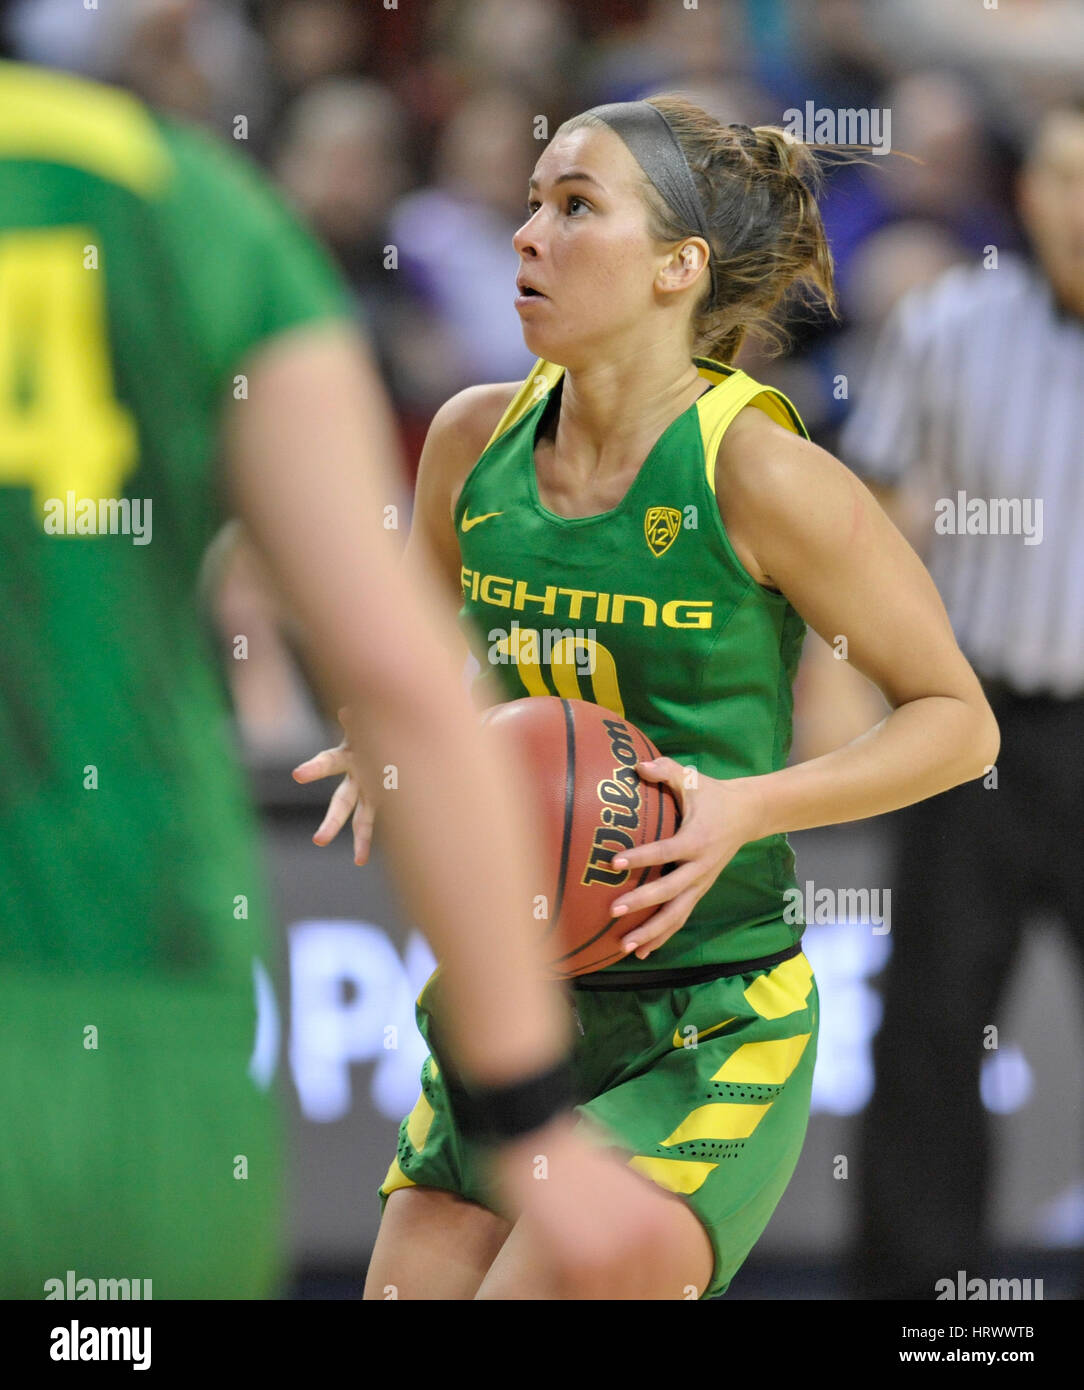 March 3, 2017: Oregon guard Lexi Bando (10) in action during a PAC12 women's tournament game between the Washington Huskies and the Oregon Ducks. The game was played at Key Arena in Seattle, WA. Jeff Halstead / CSM Stock Photo